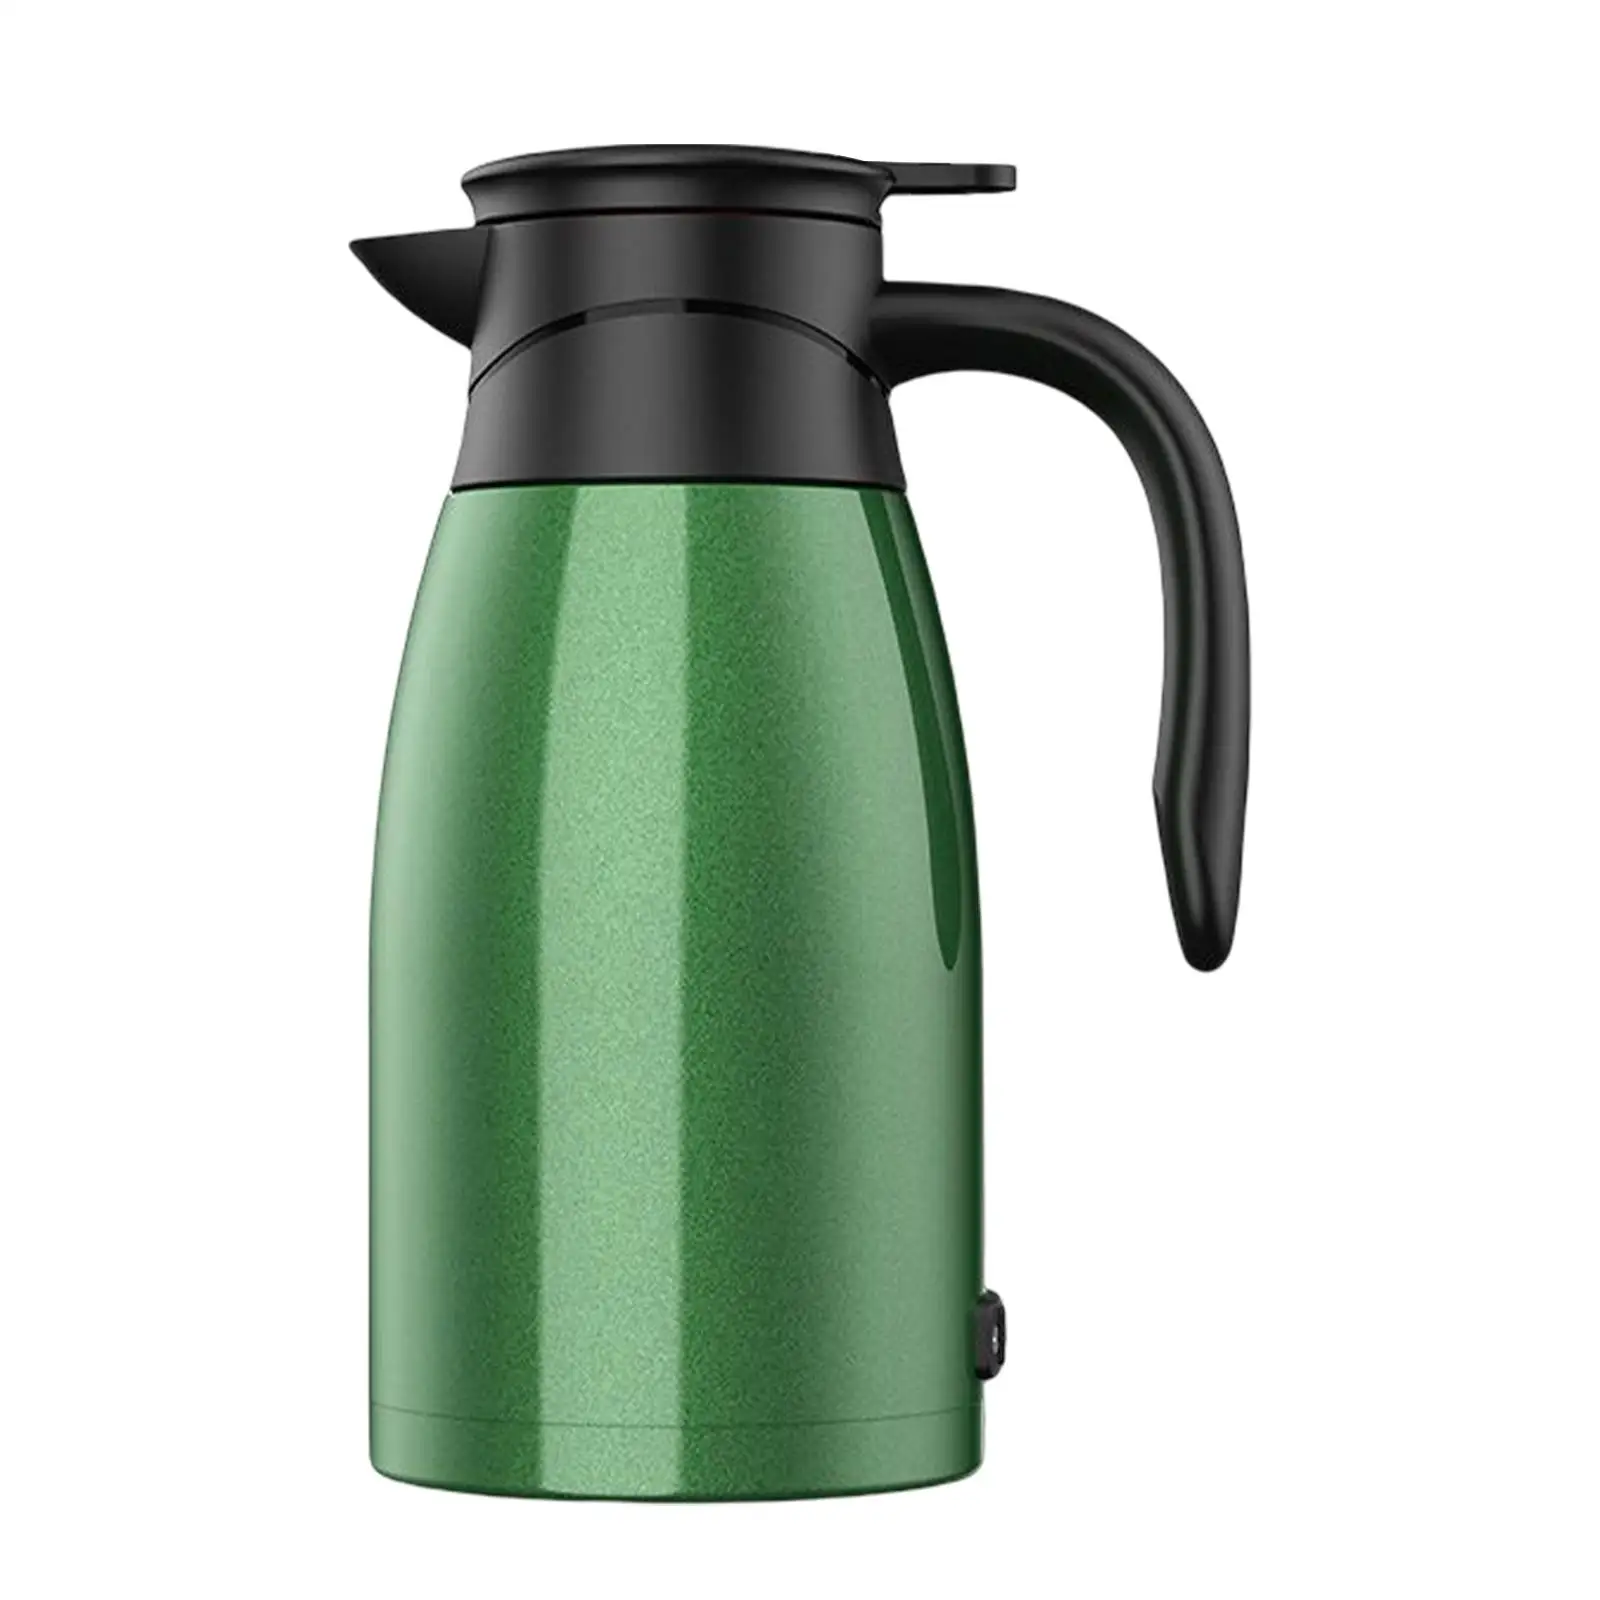 12 Kettle Boiler 1400ml Temperature Display Heating Cup for Travel Outdoor